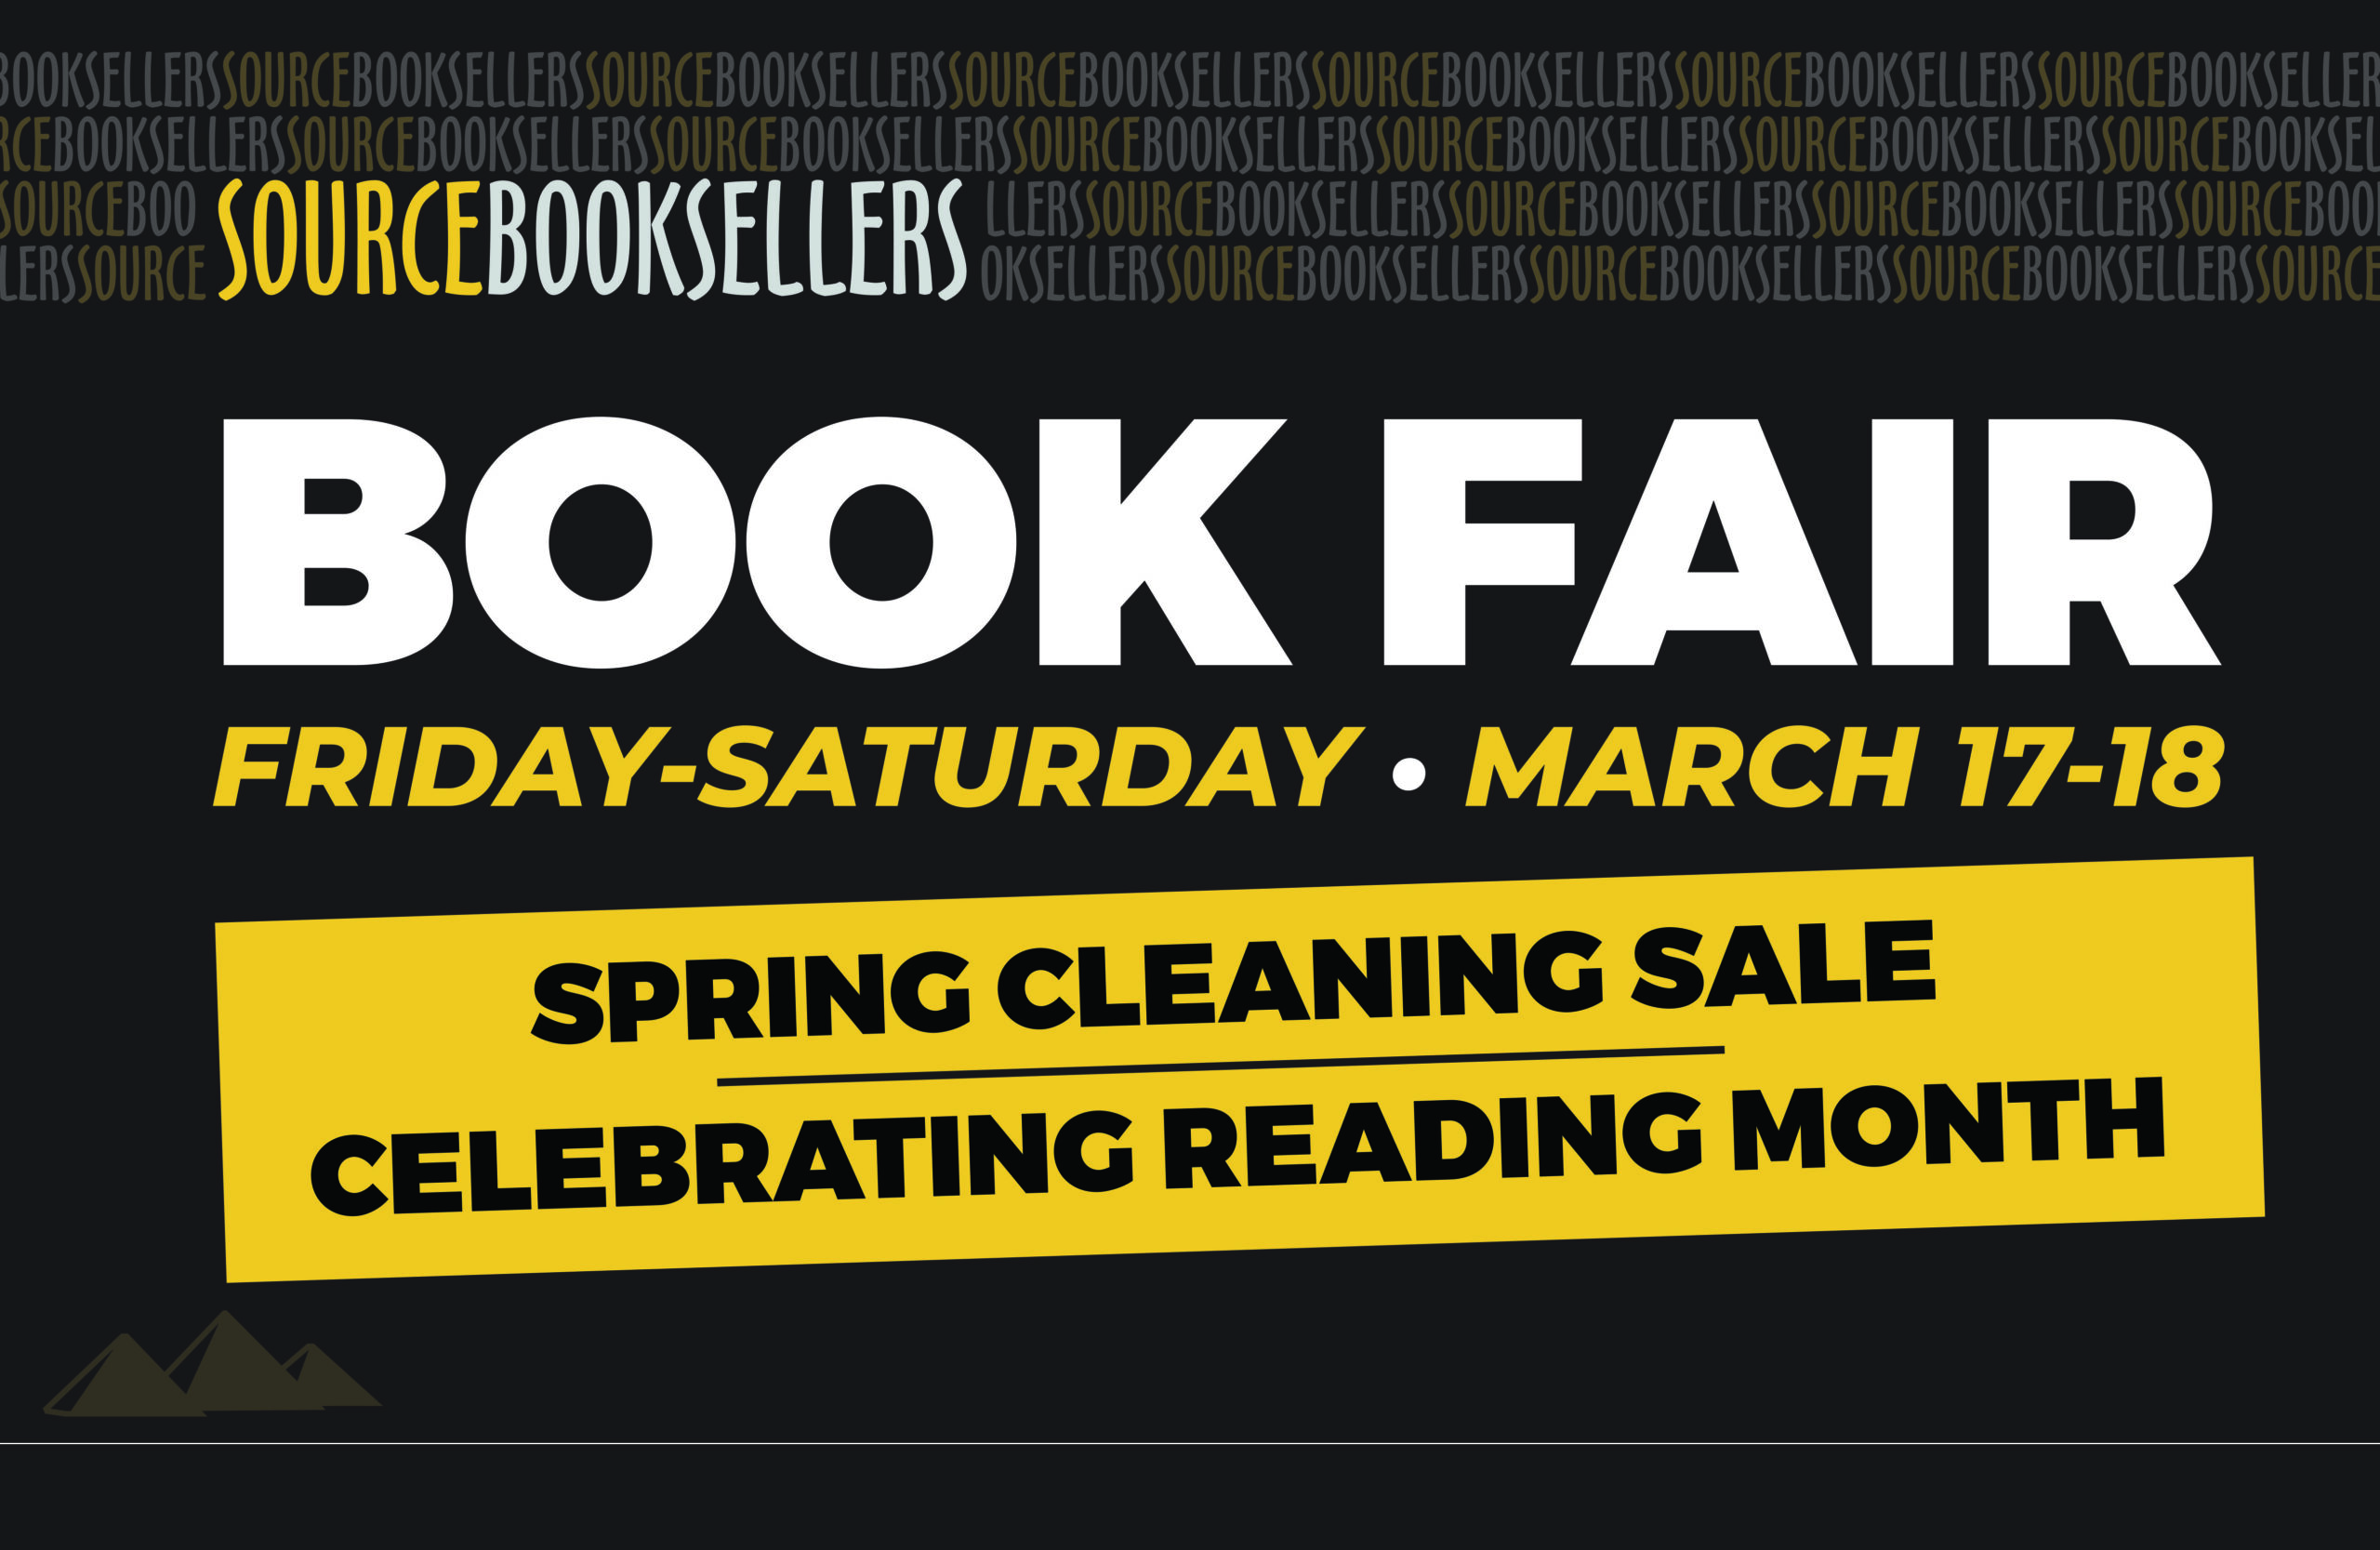 Source Booksellers Book Fair – March 17-18